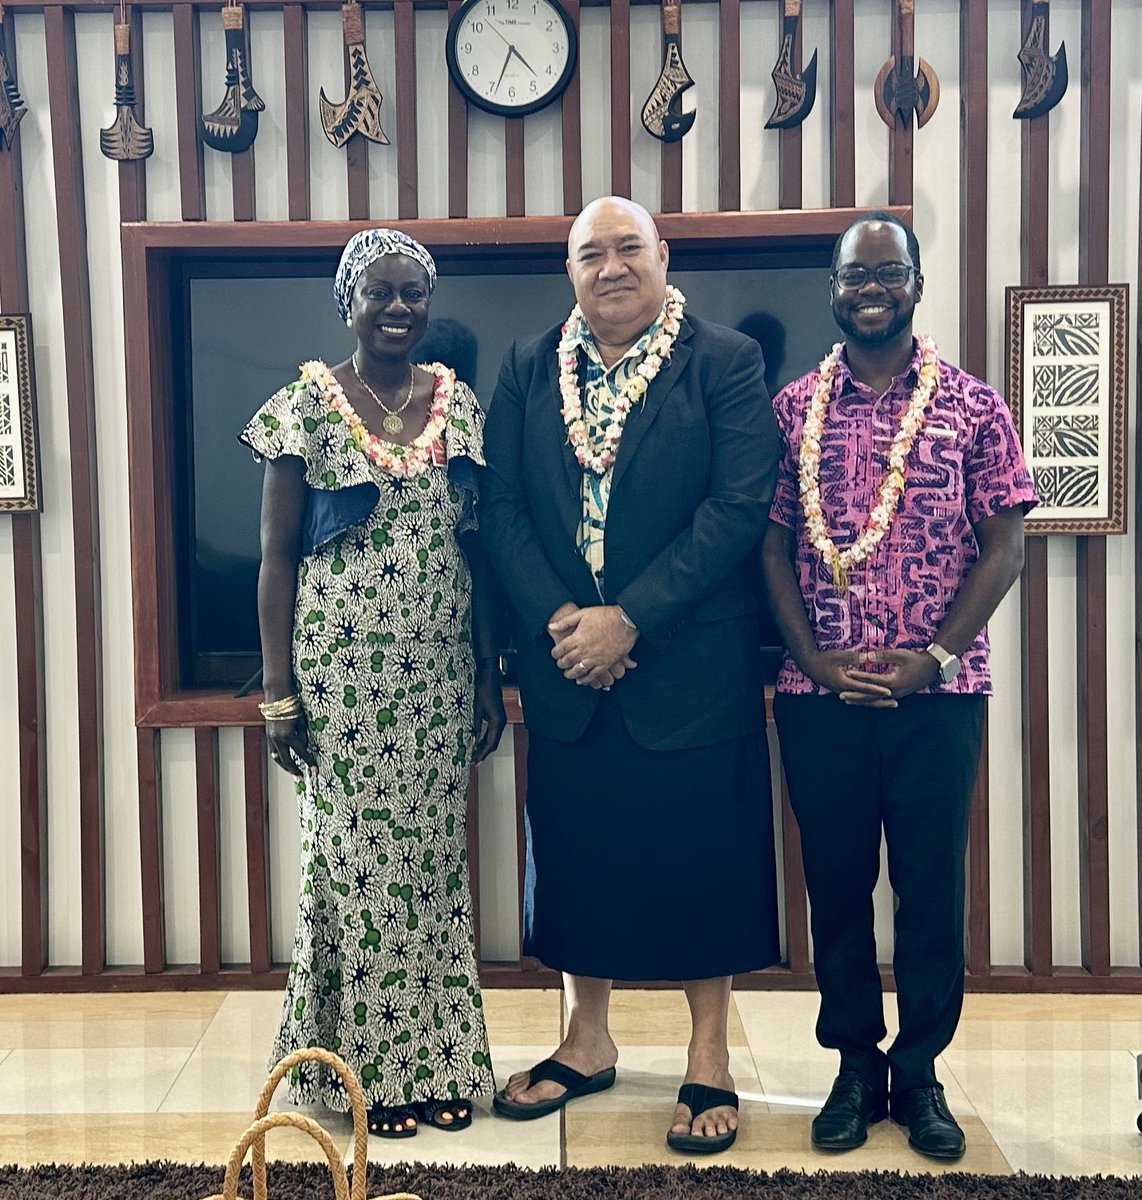 Delighted to welcome to 🇼🇸@WHOPRO’s new Regional Director, Dr. Saia M’au Piukala, 1st Pacific Islander in this role. We had an insightful discussion on Pacific health priorities needing integrated UN response. 🙏🏾 for WHO’s invaluable contributions to @un_samoa. #HealthForAll